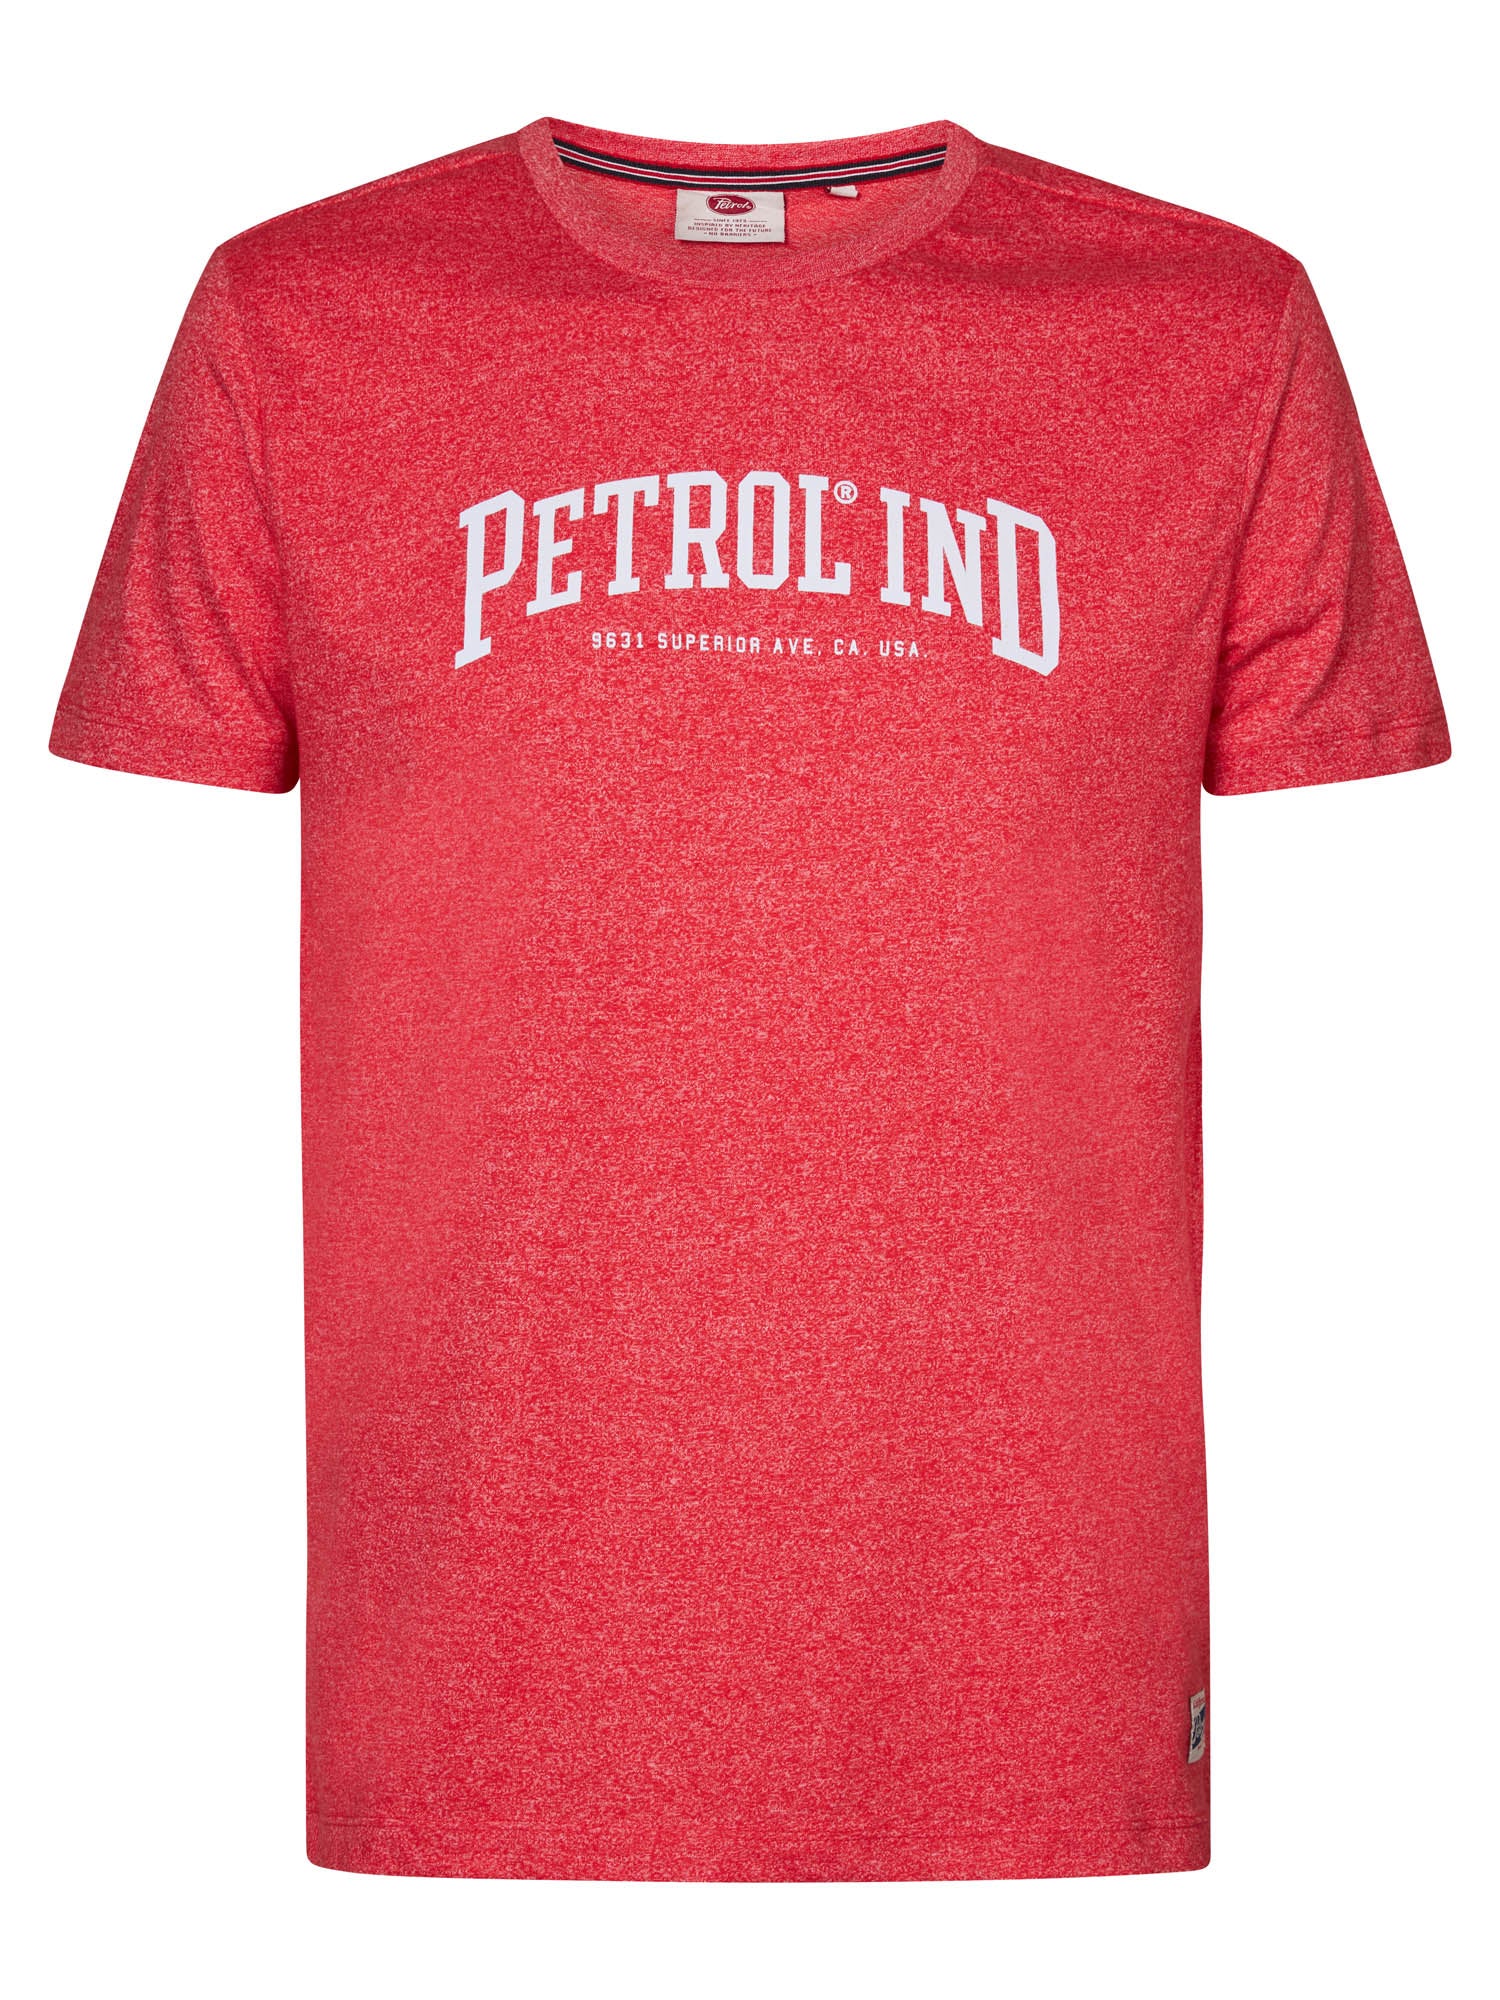 Petrol Industries Logo T-Shirt Imperial Red - S